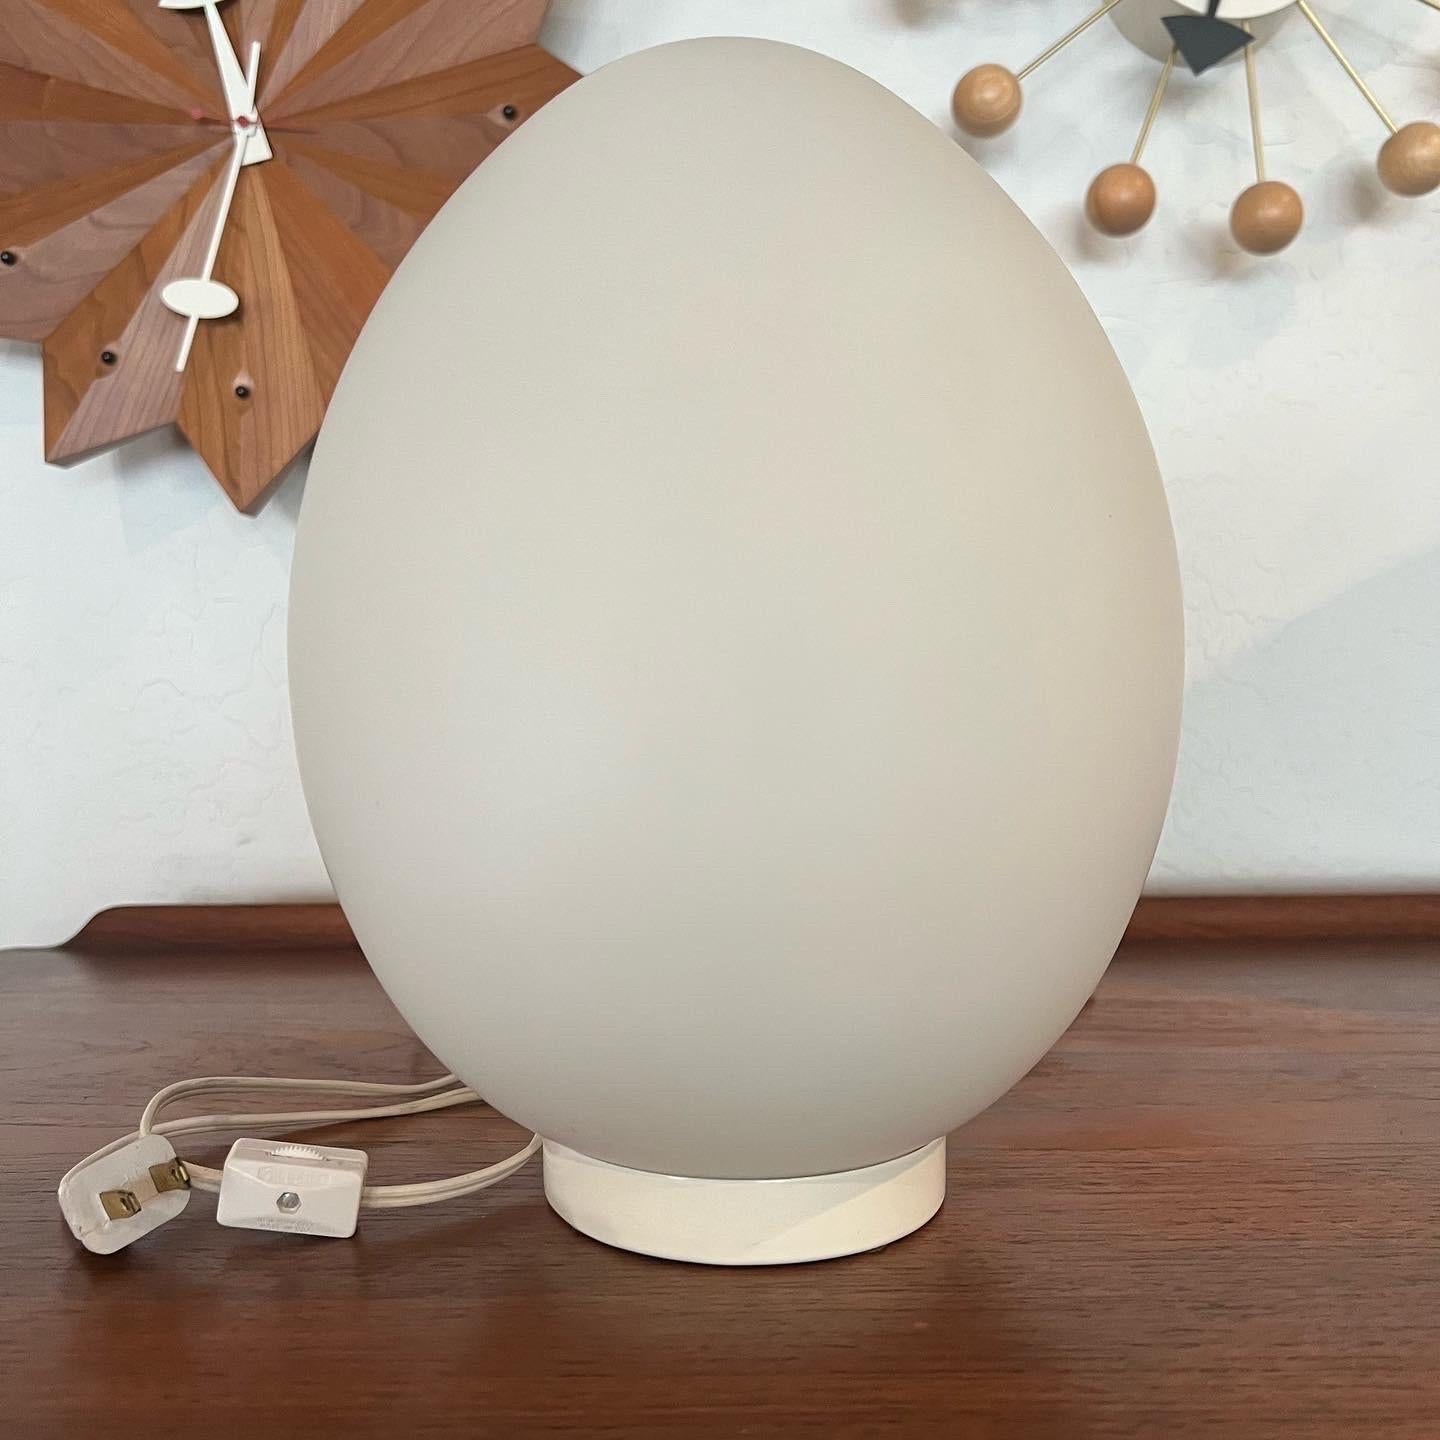 CVV Verrerie de Vianne handblown frosted glass egg lamp. Made in France, 1960s-1970s. 11” tall x 8” wide. In excellent condition. Colored bulbs would look great in this.